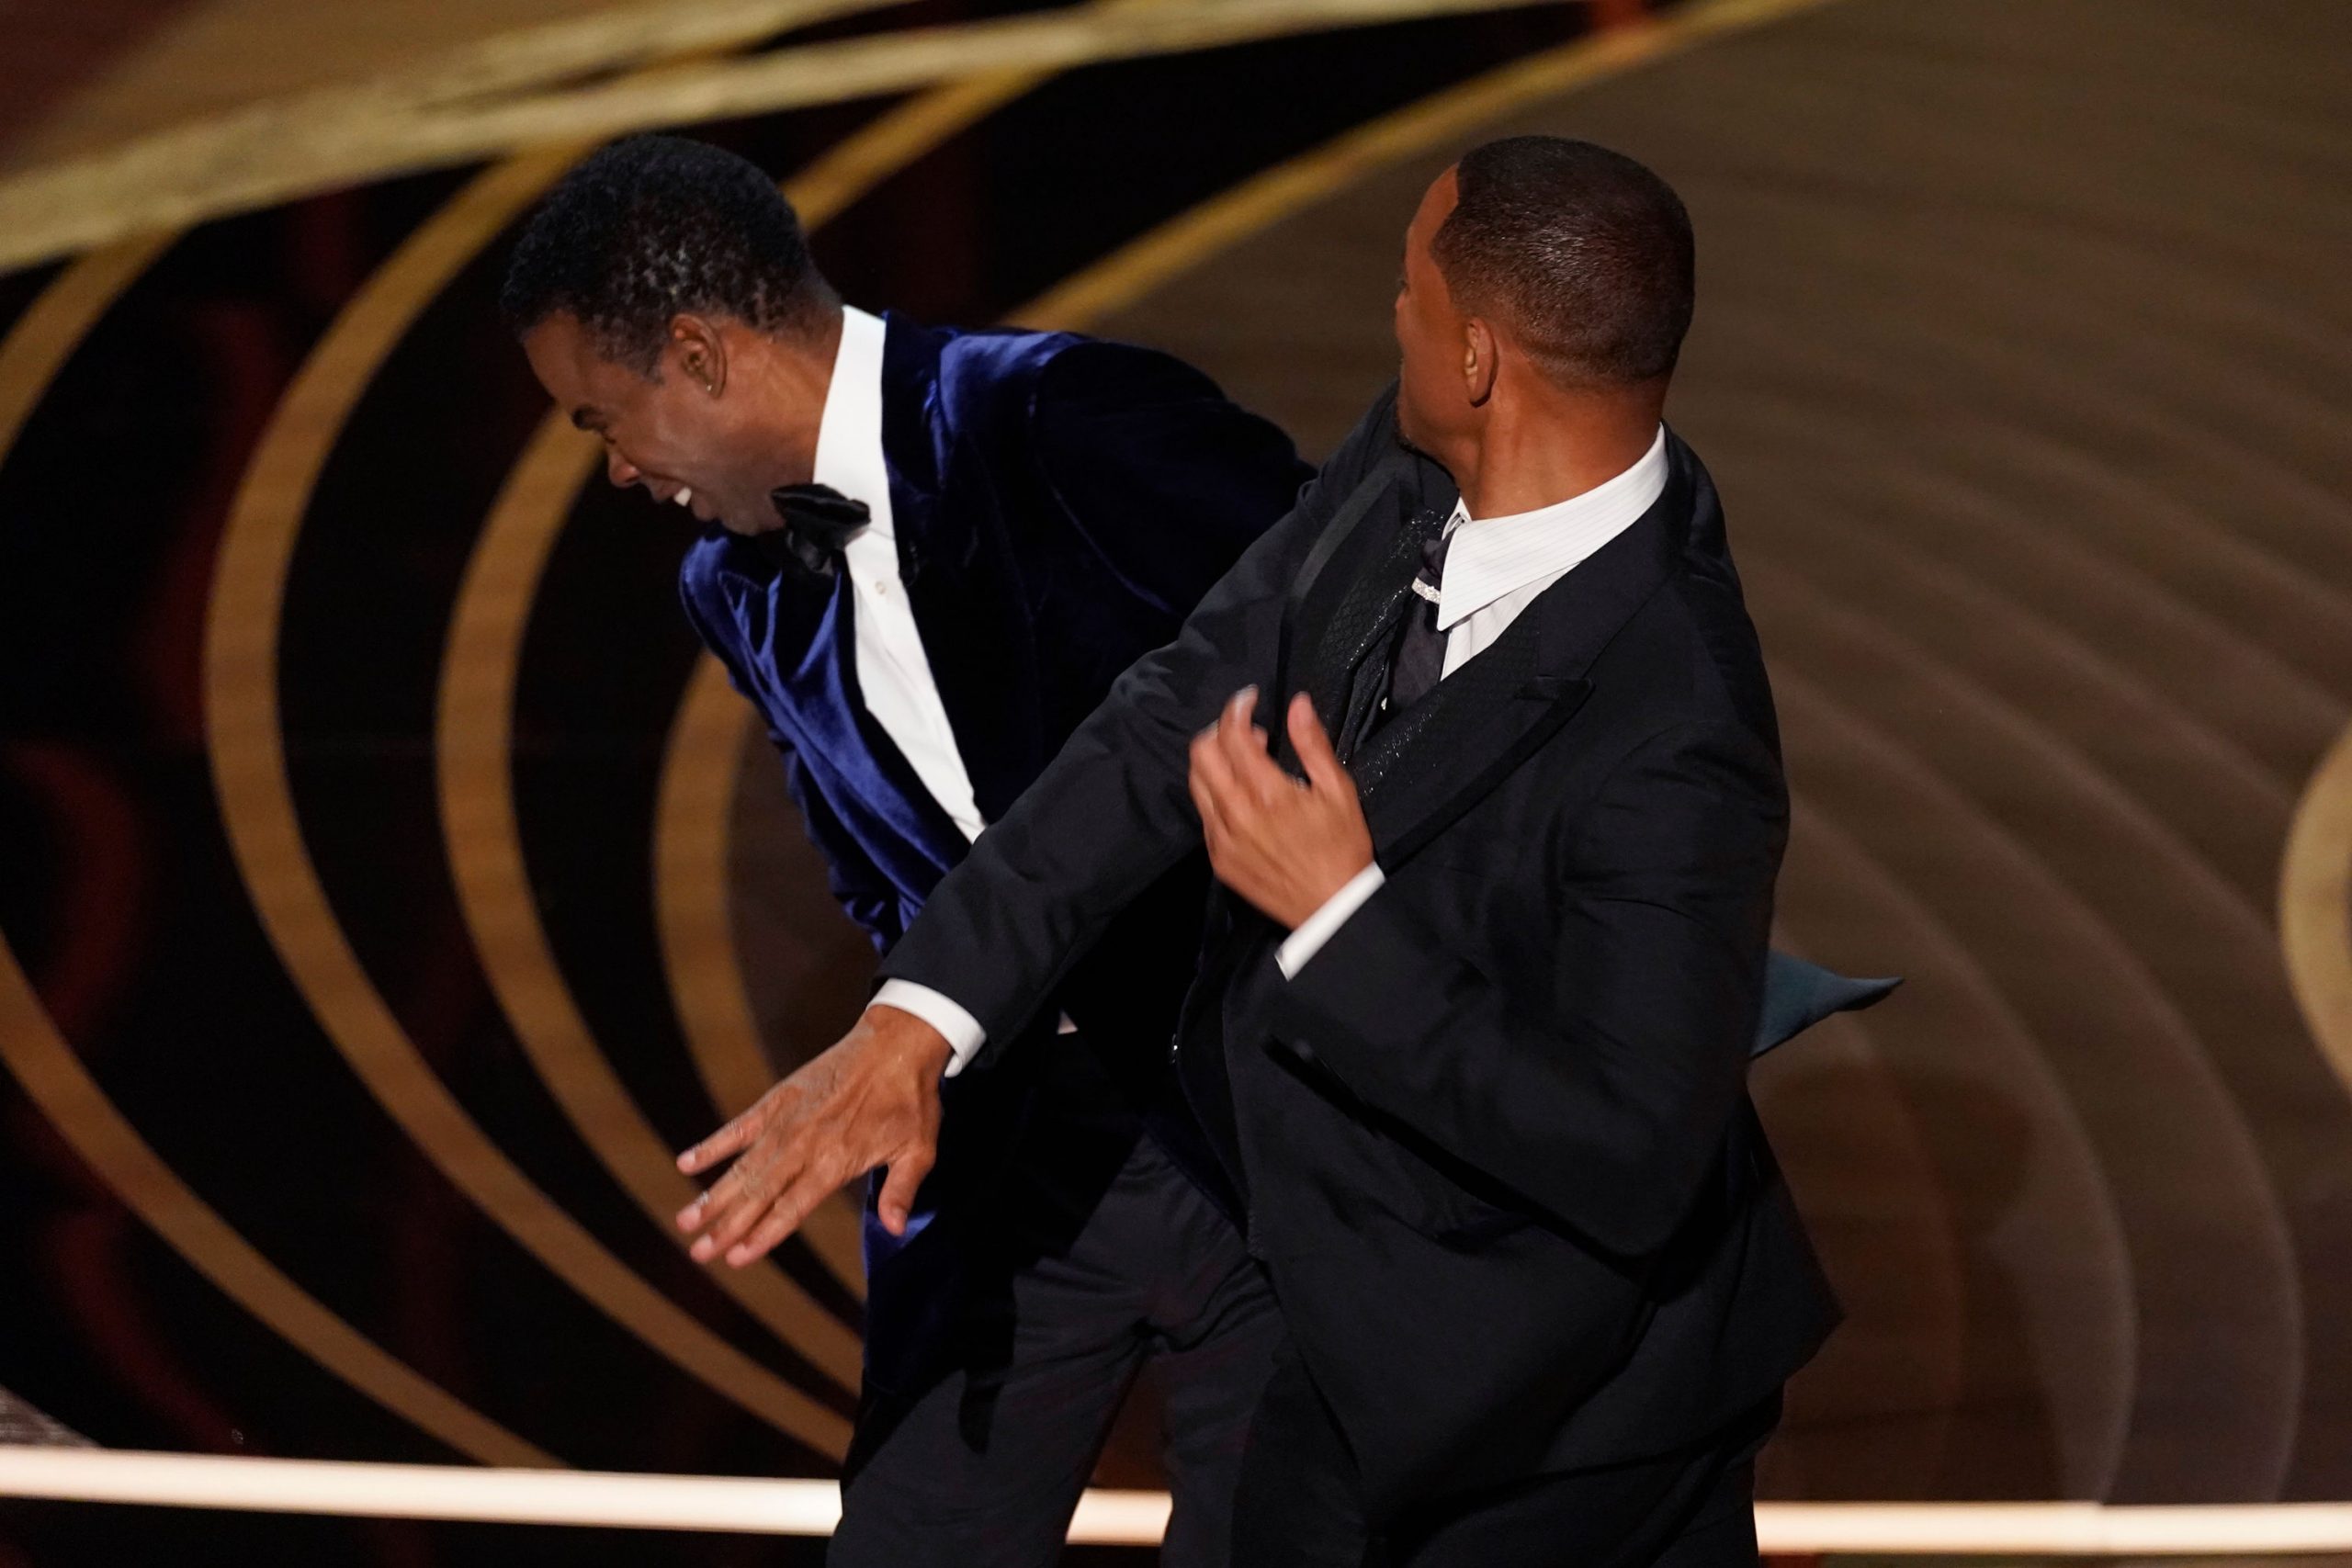 Will Smith slaps Chris Rock: All that happened and Academy’s response